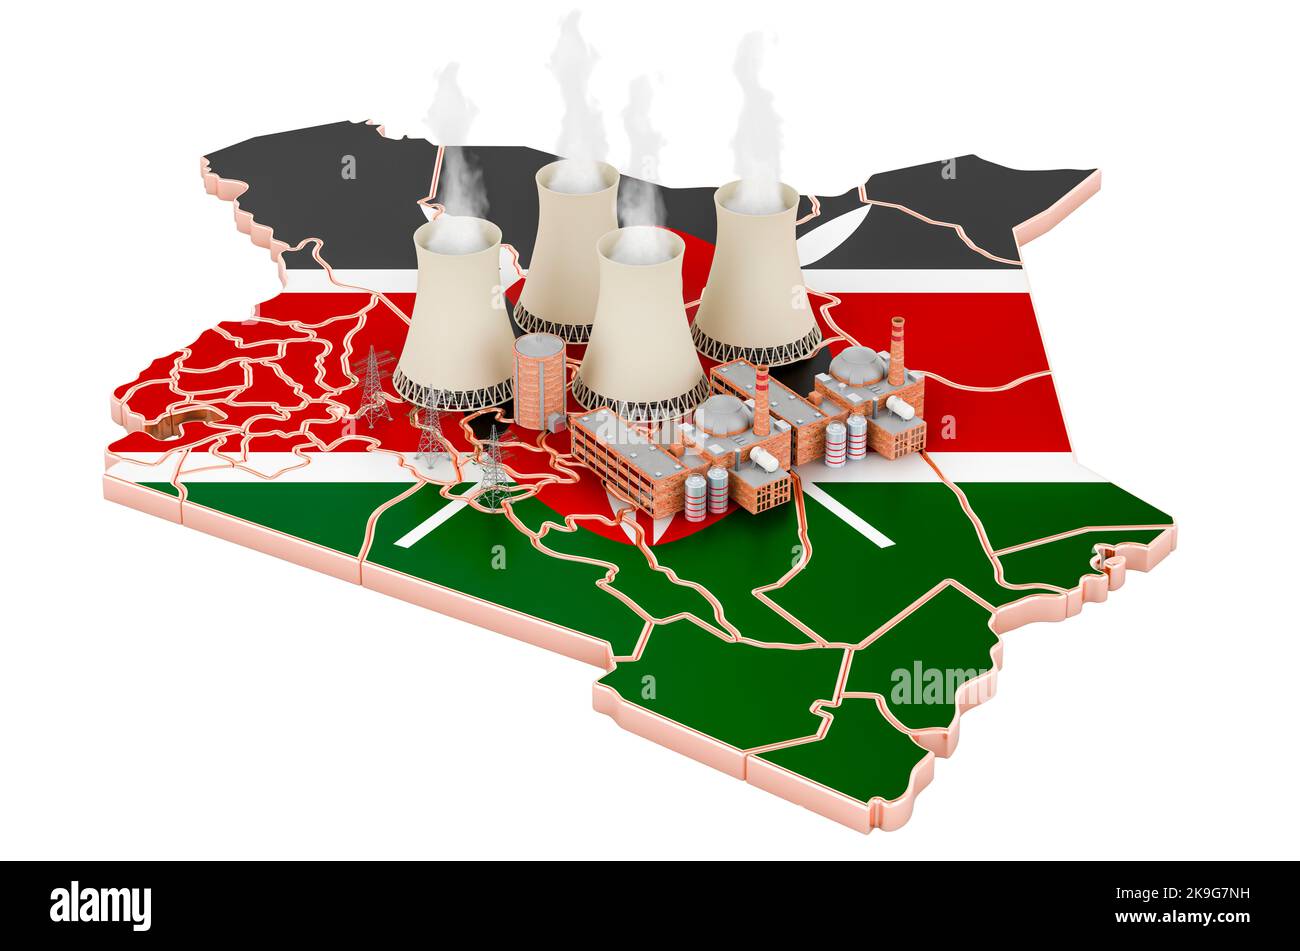 Nuclear power stations in Kenya, 3D rendering isolated on white background Stock Photo